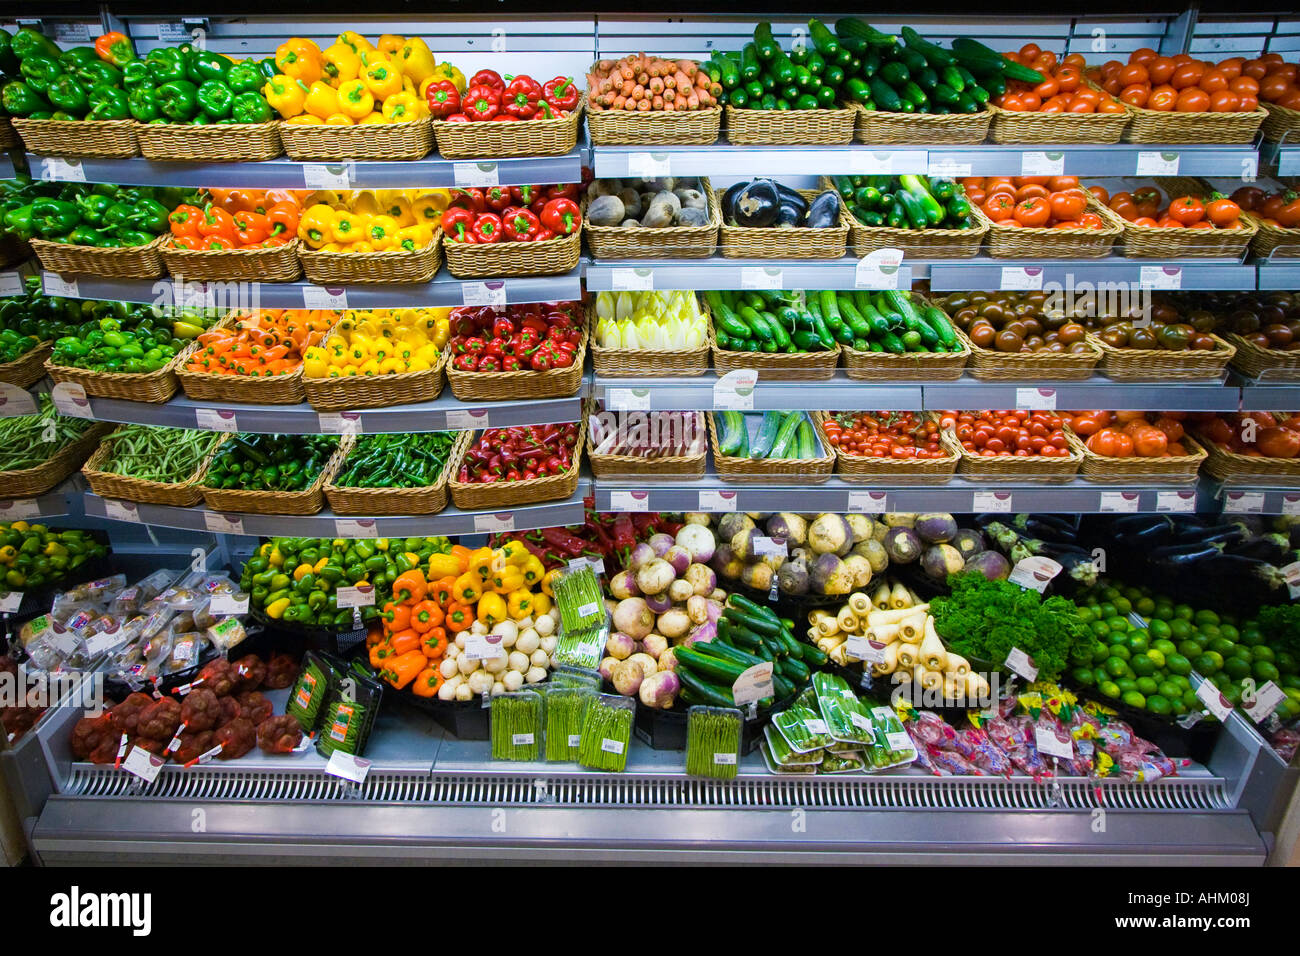 Grocery Store Produce Aisle Stock Photo by Mint_Images